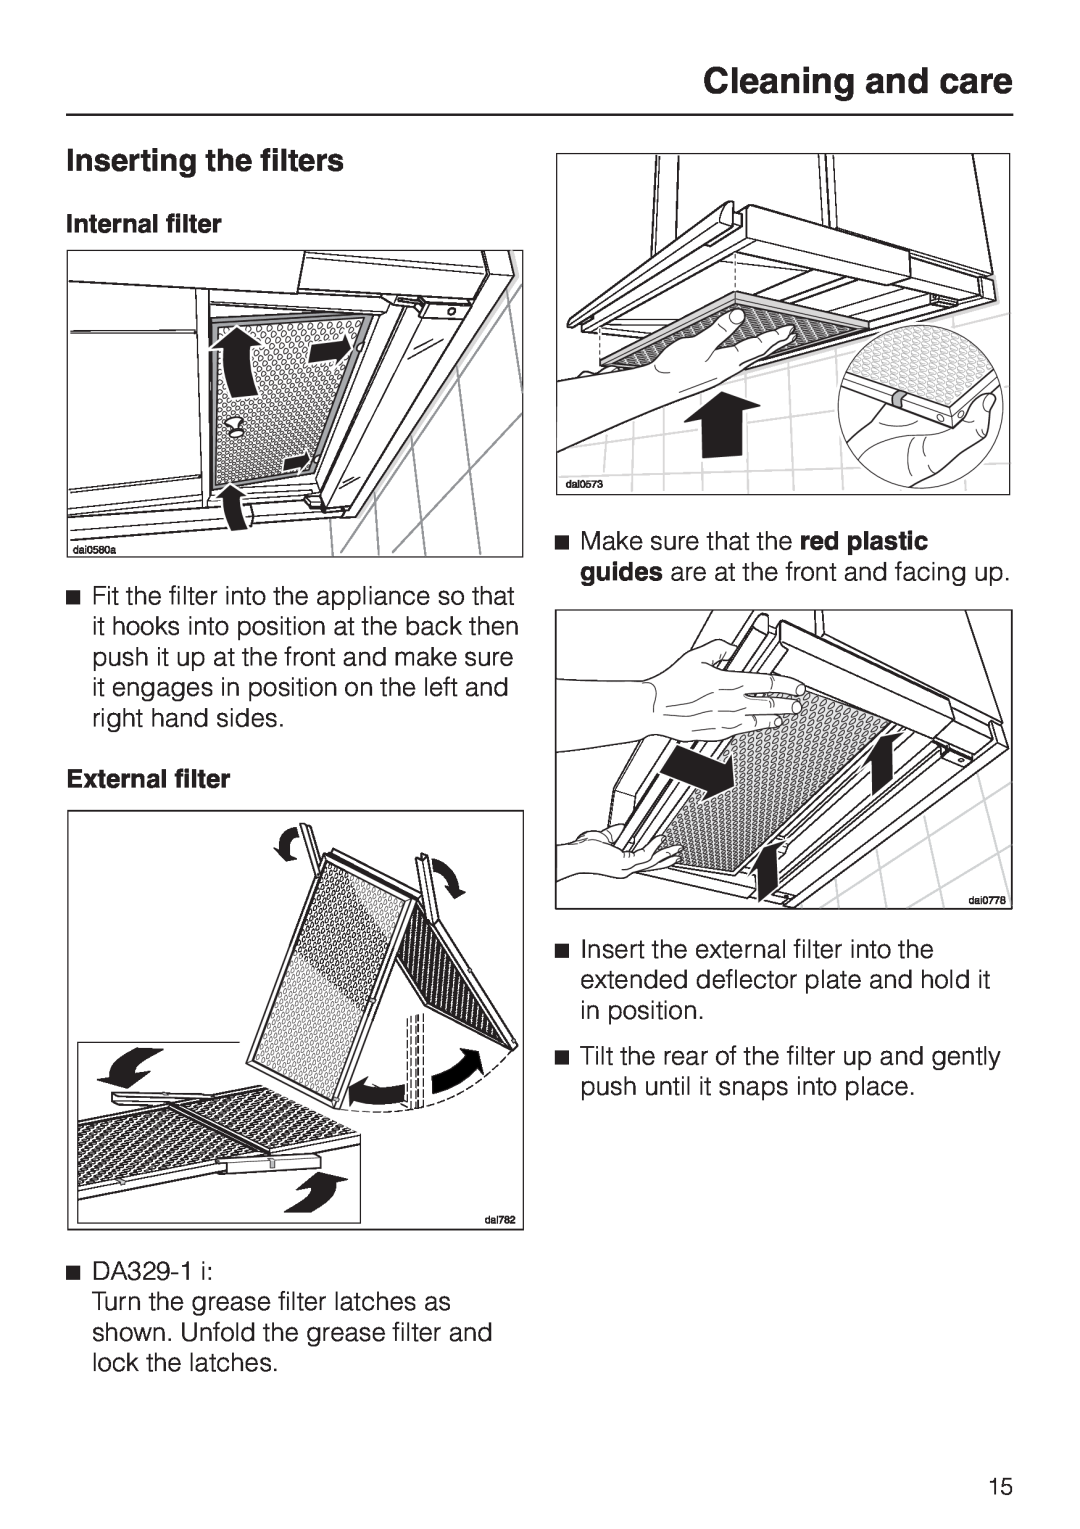 Miele DA329-1I, DA326-1I installation instructions Cleaning and care, Inserting the filters 